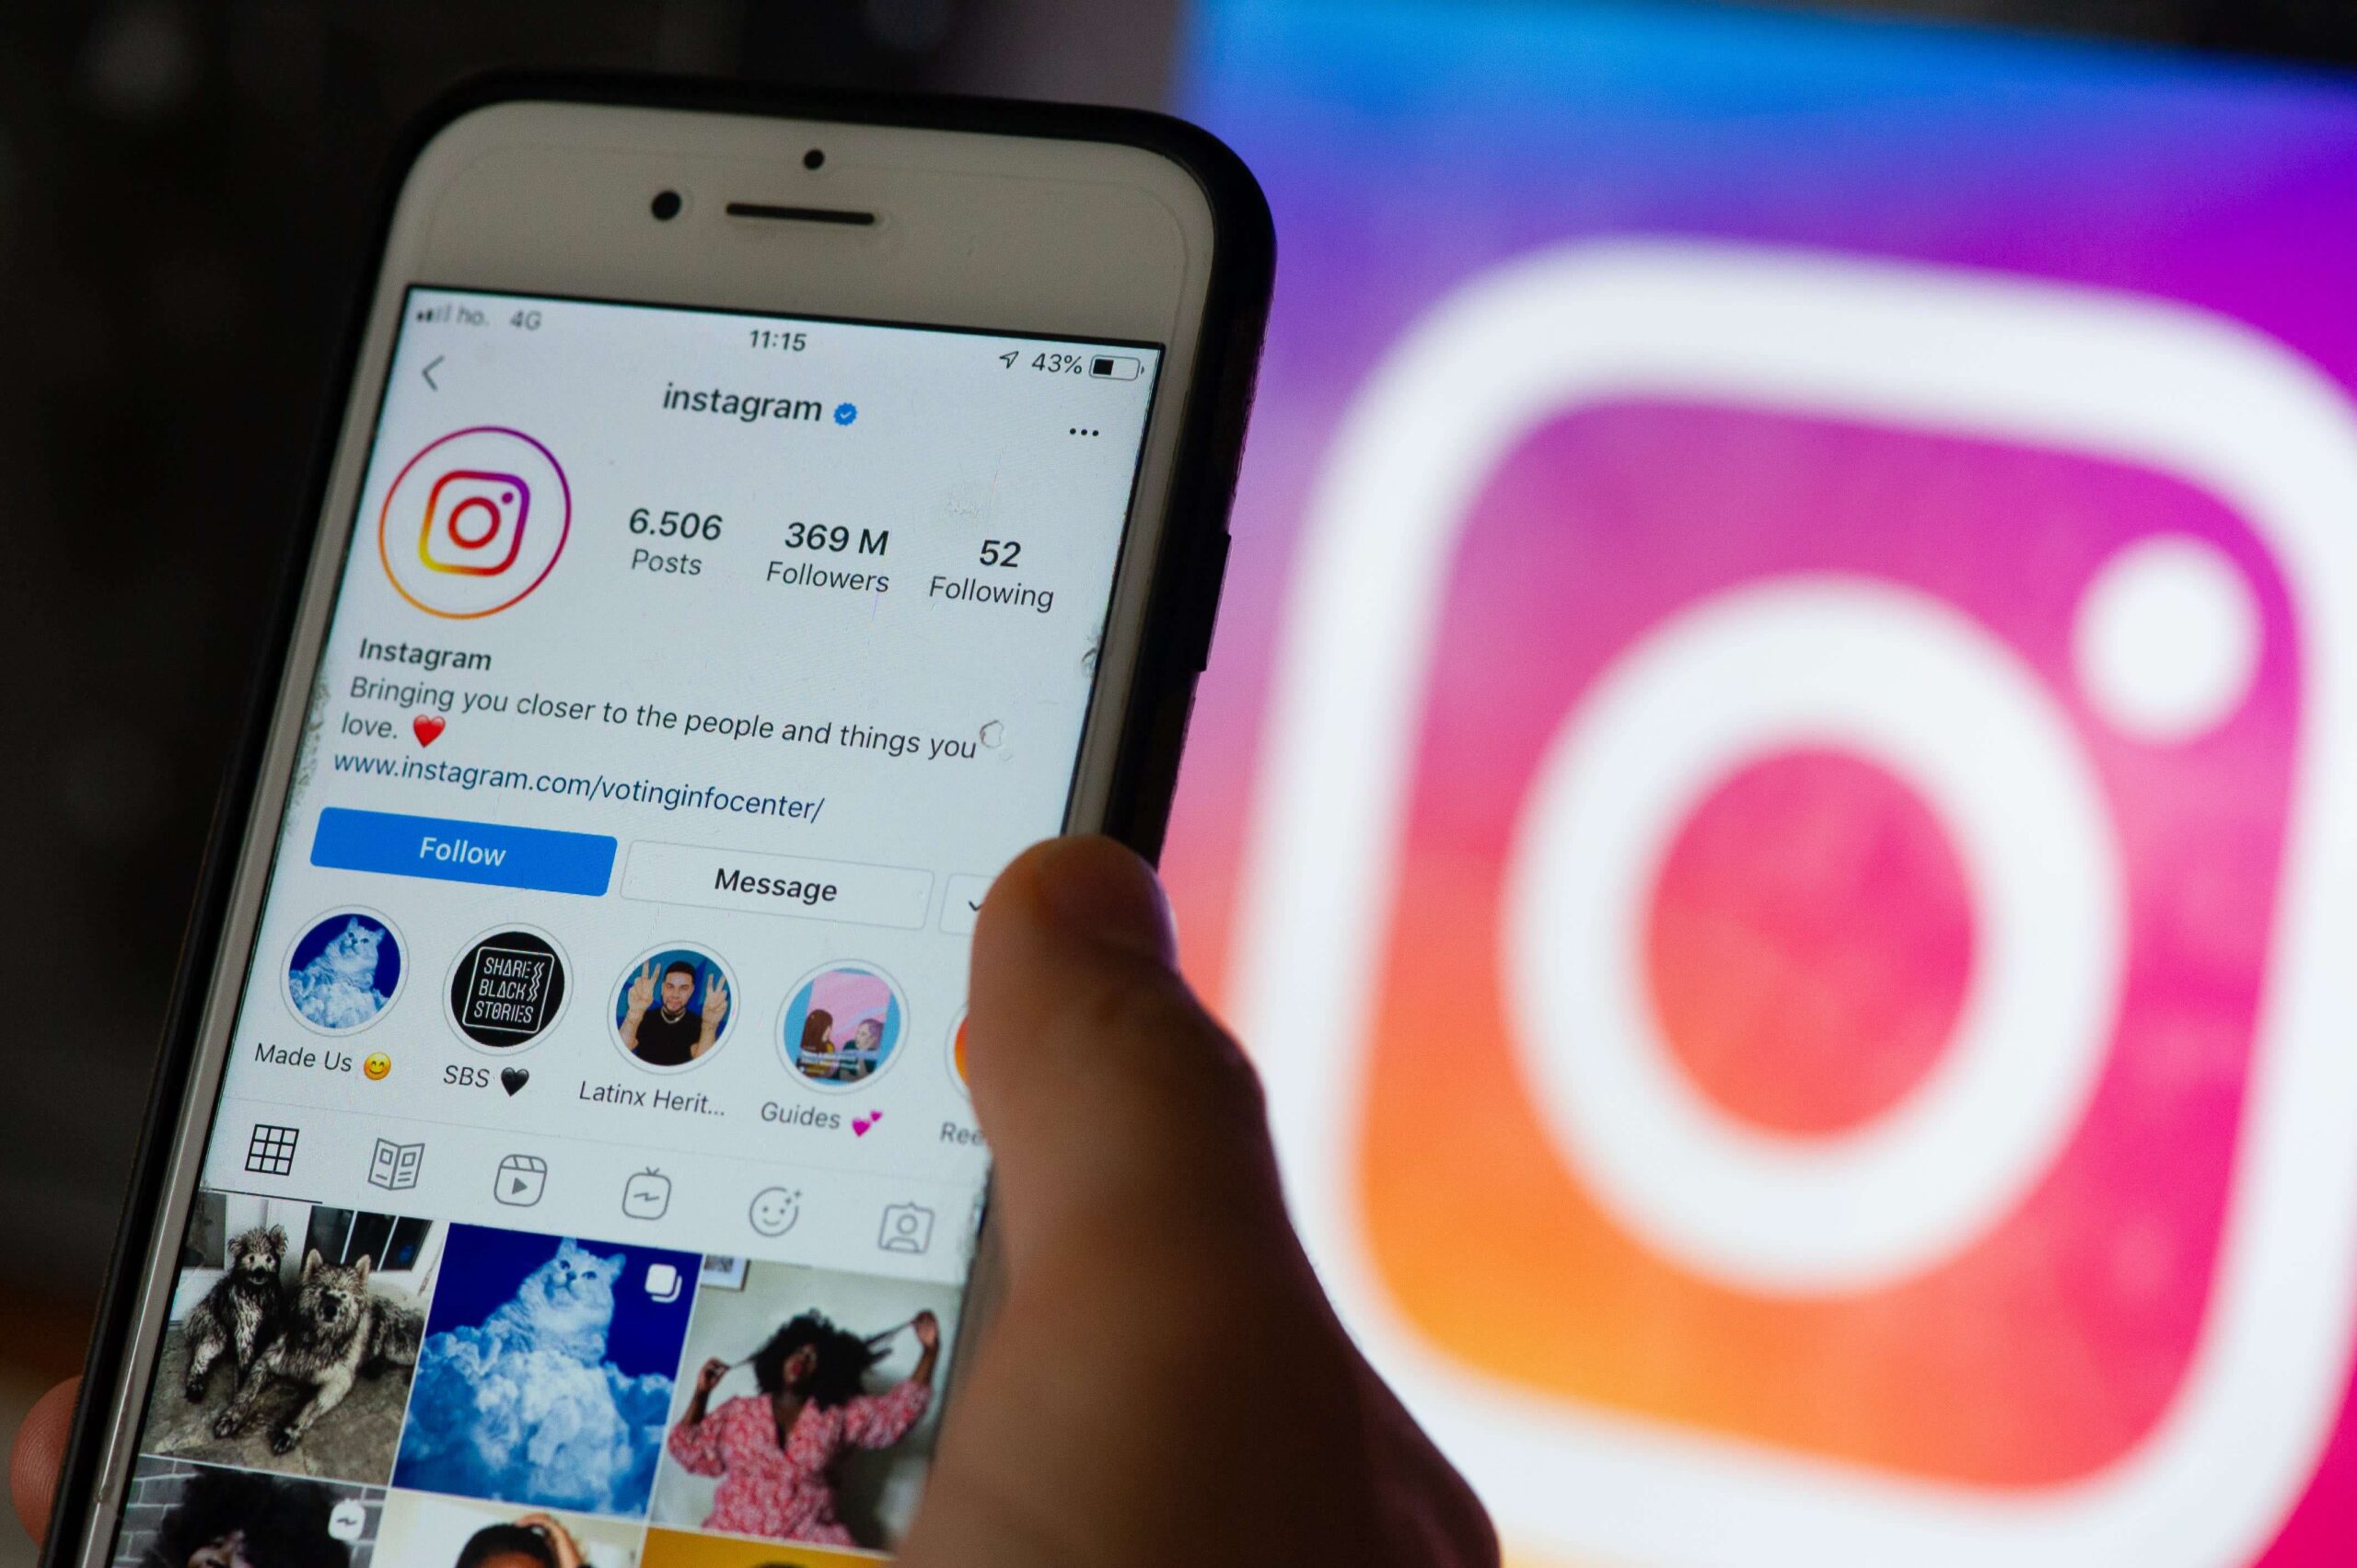 How to Get More real and engaged followers on Instagram